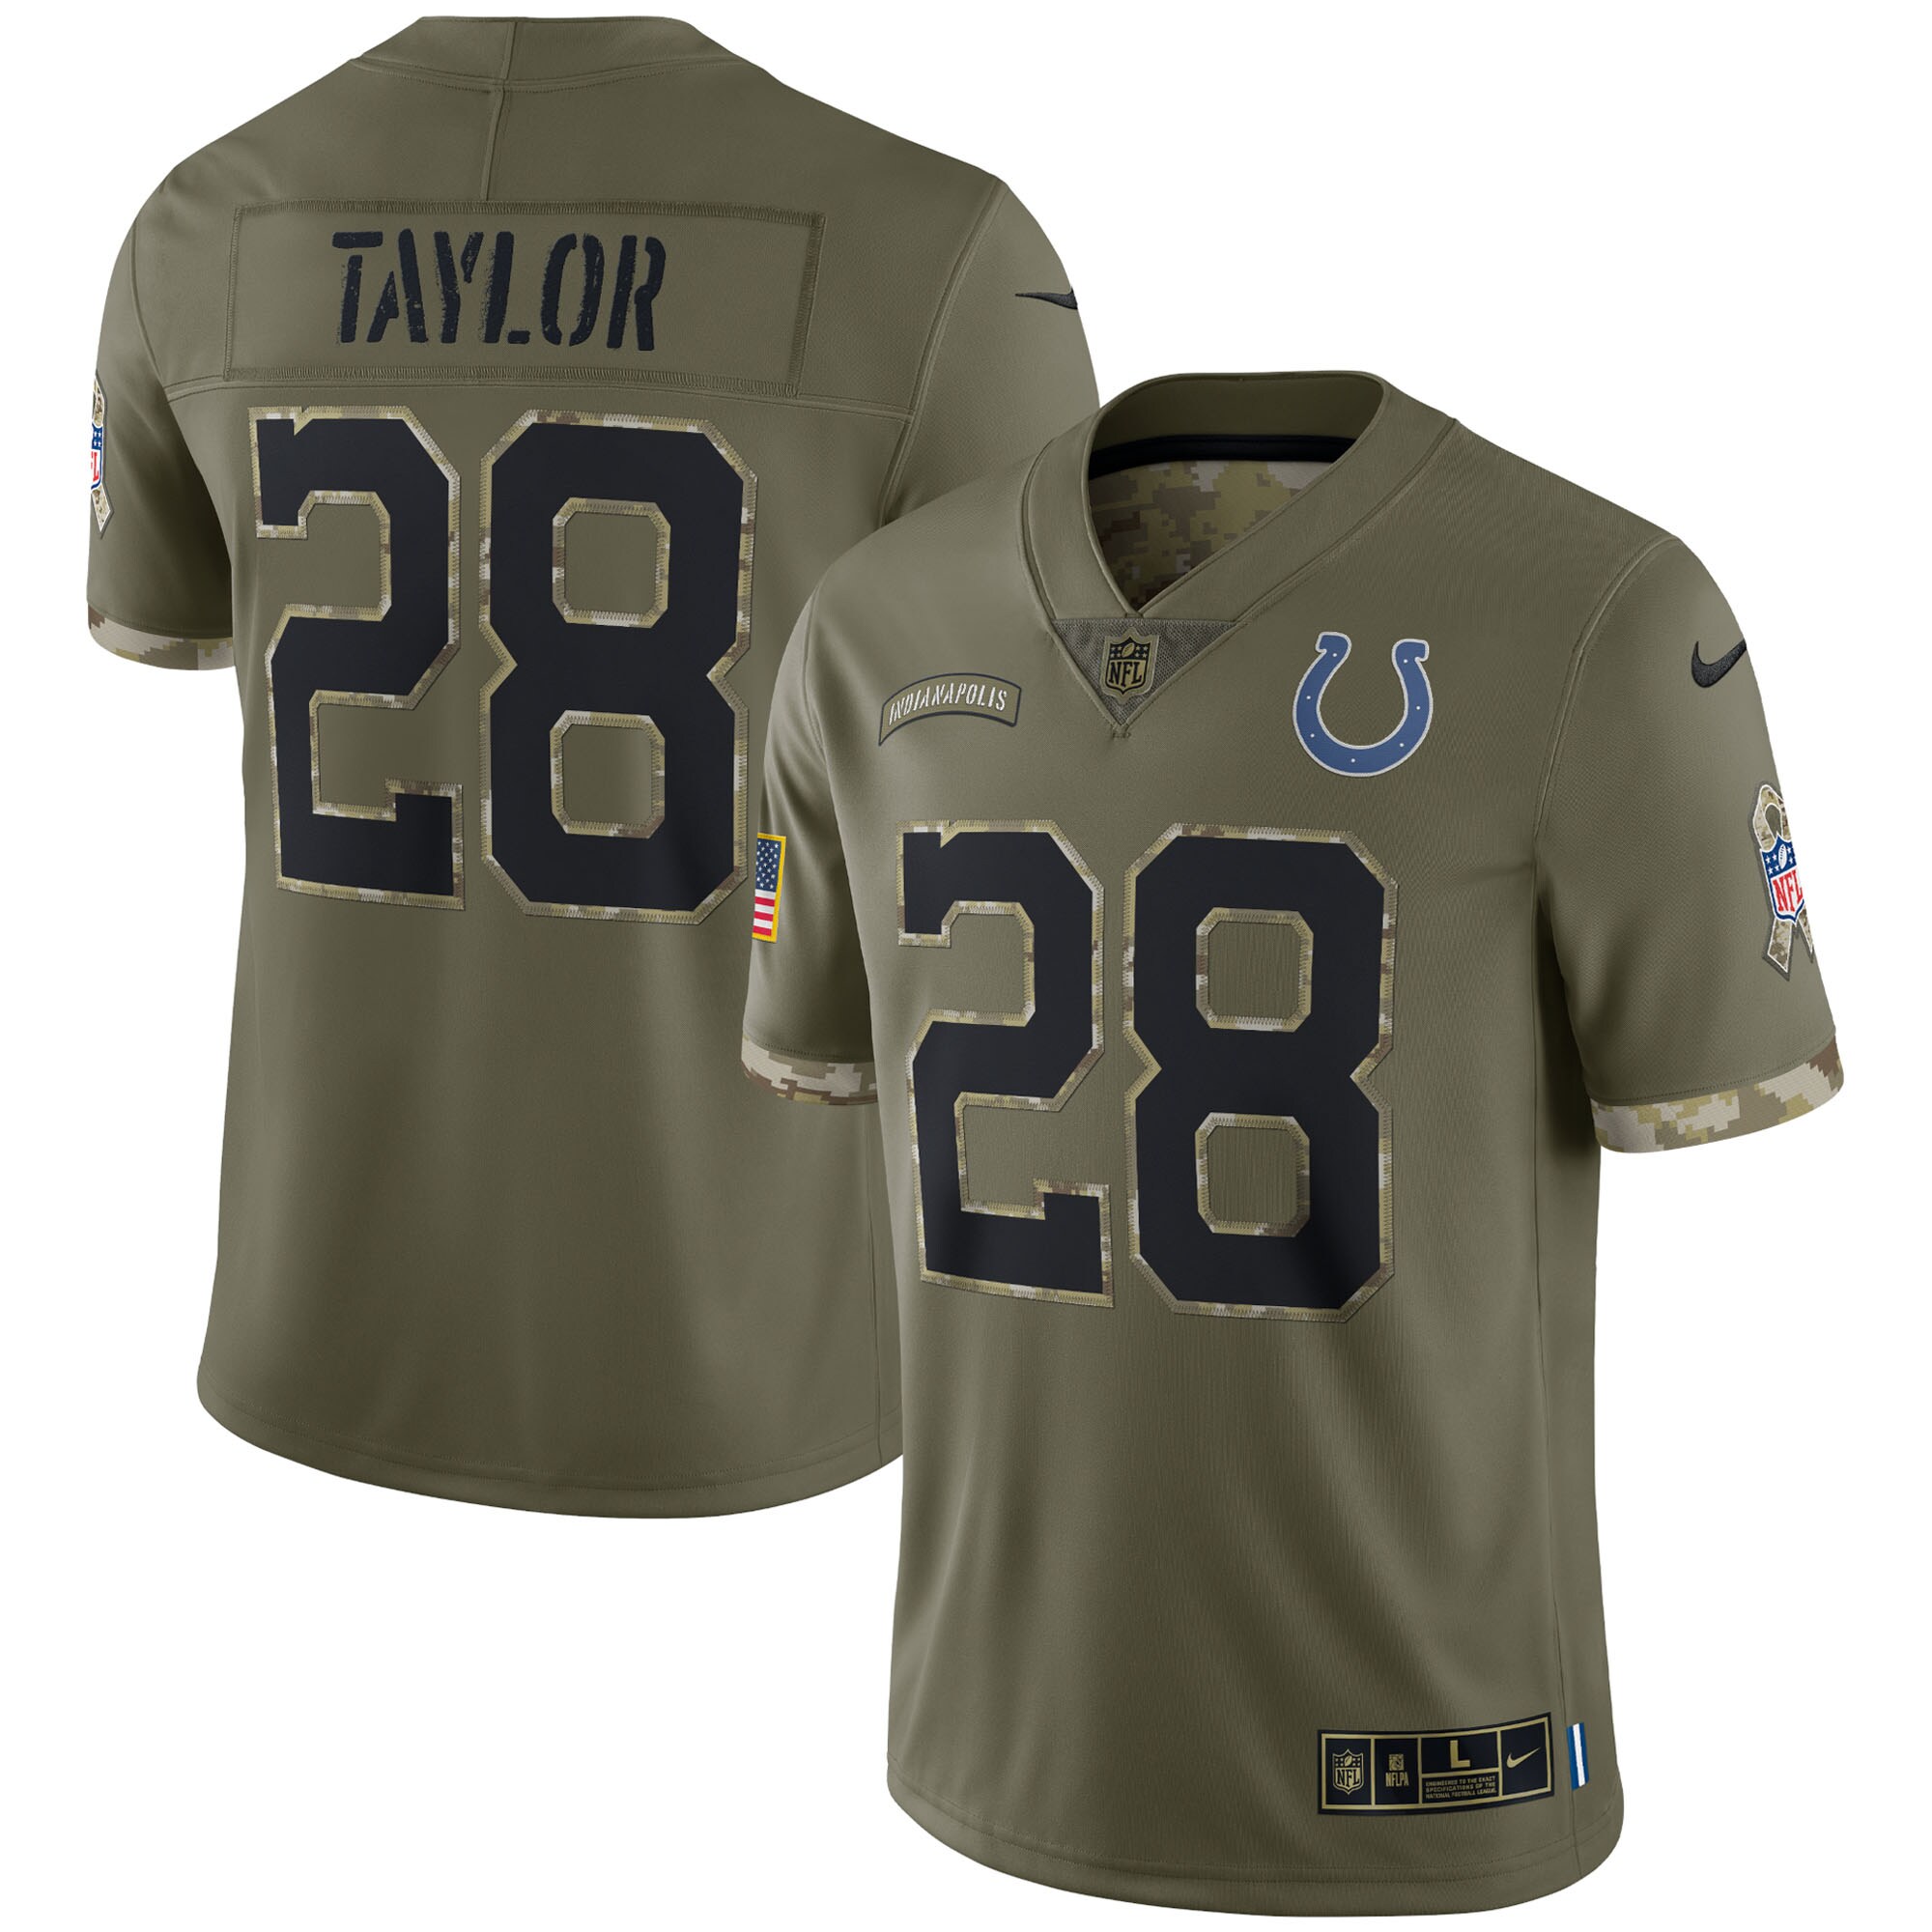 Men's Indianapolis Colts Nike Olive 2022 Salute To Service Limited Jersey